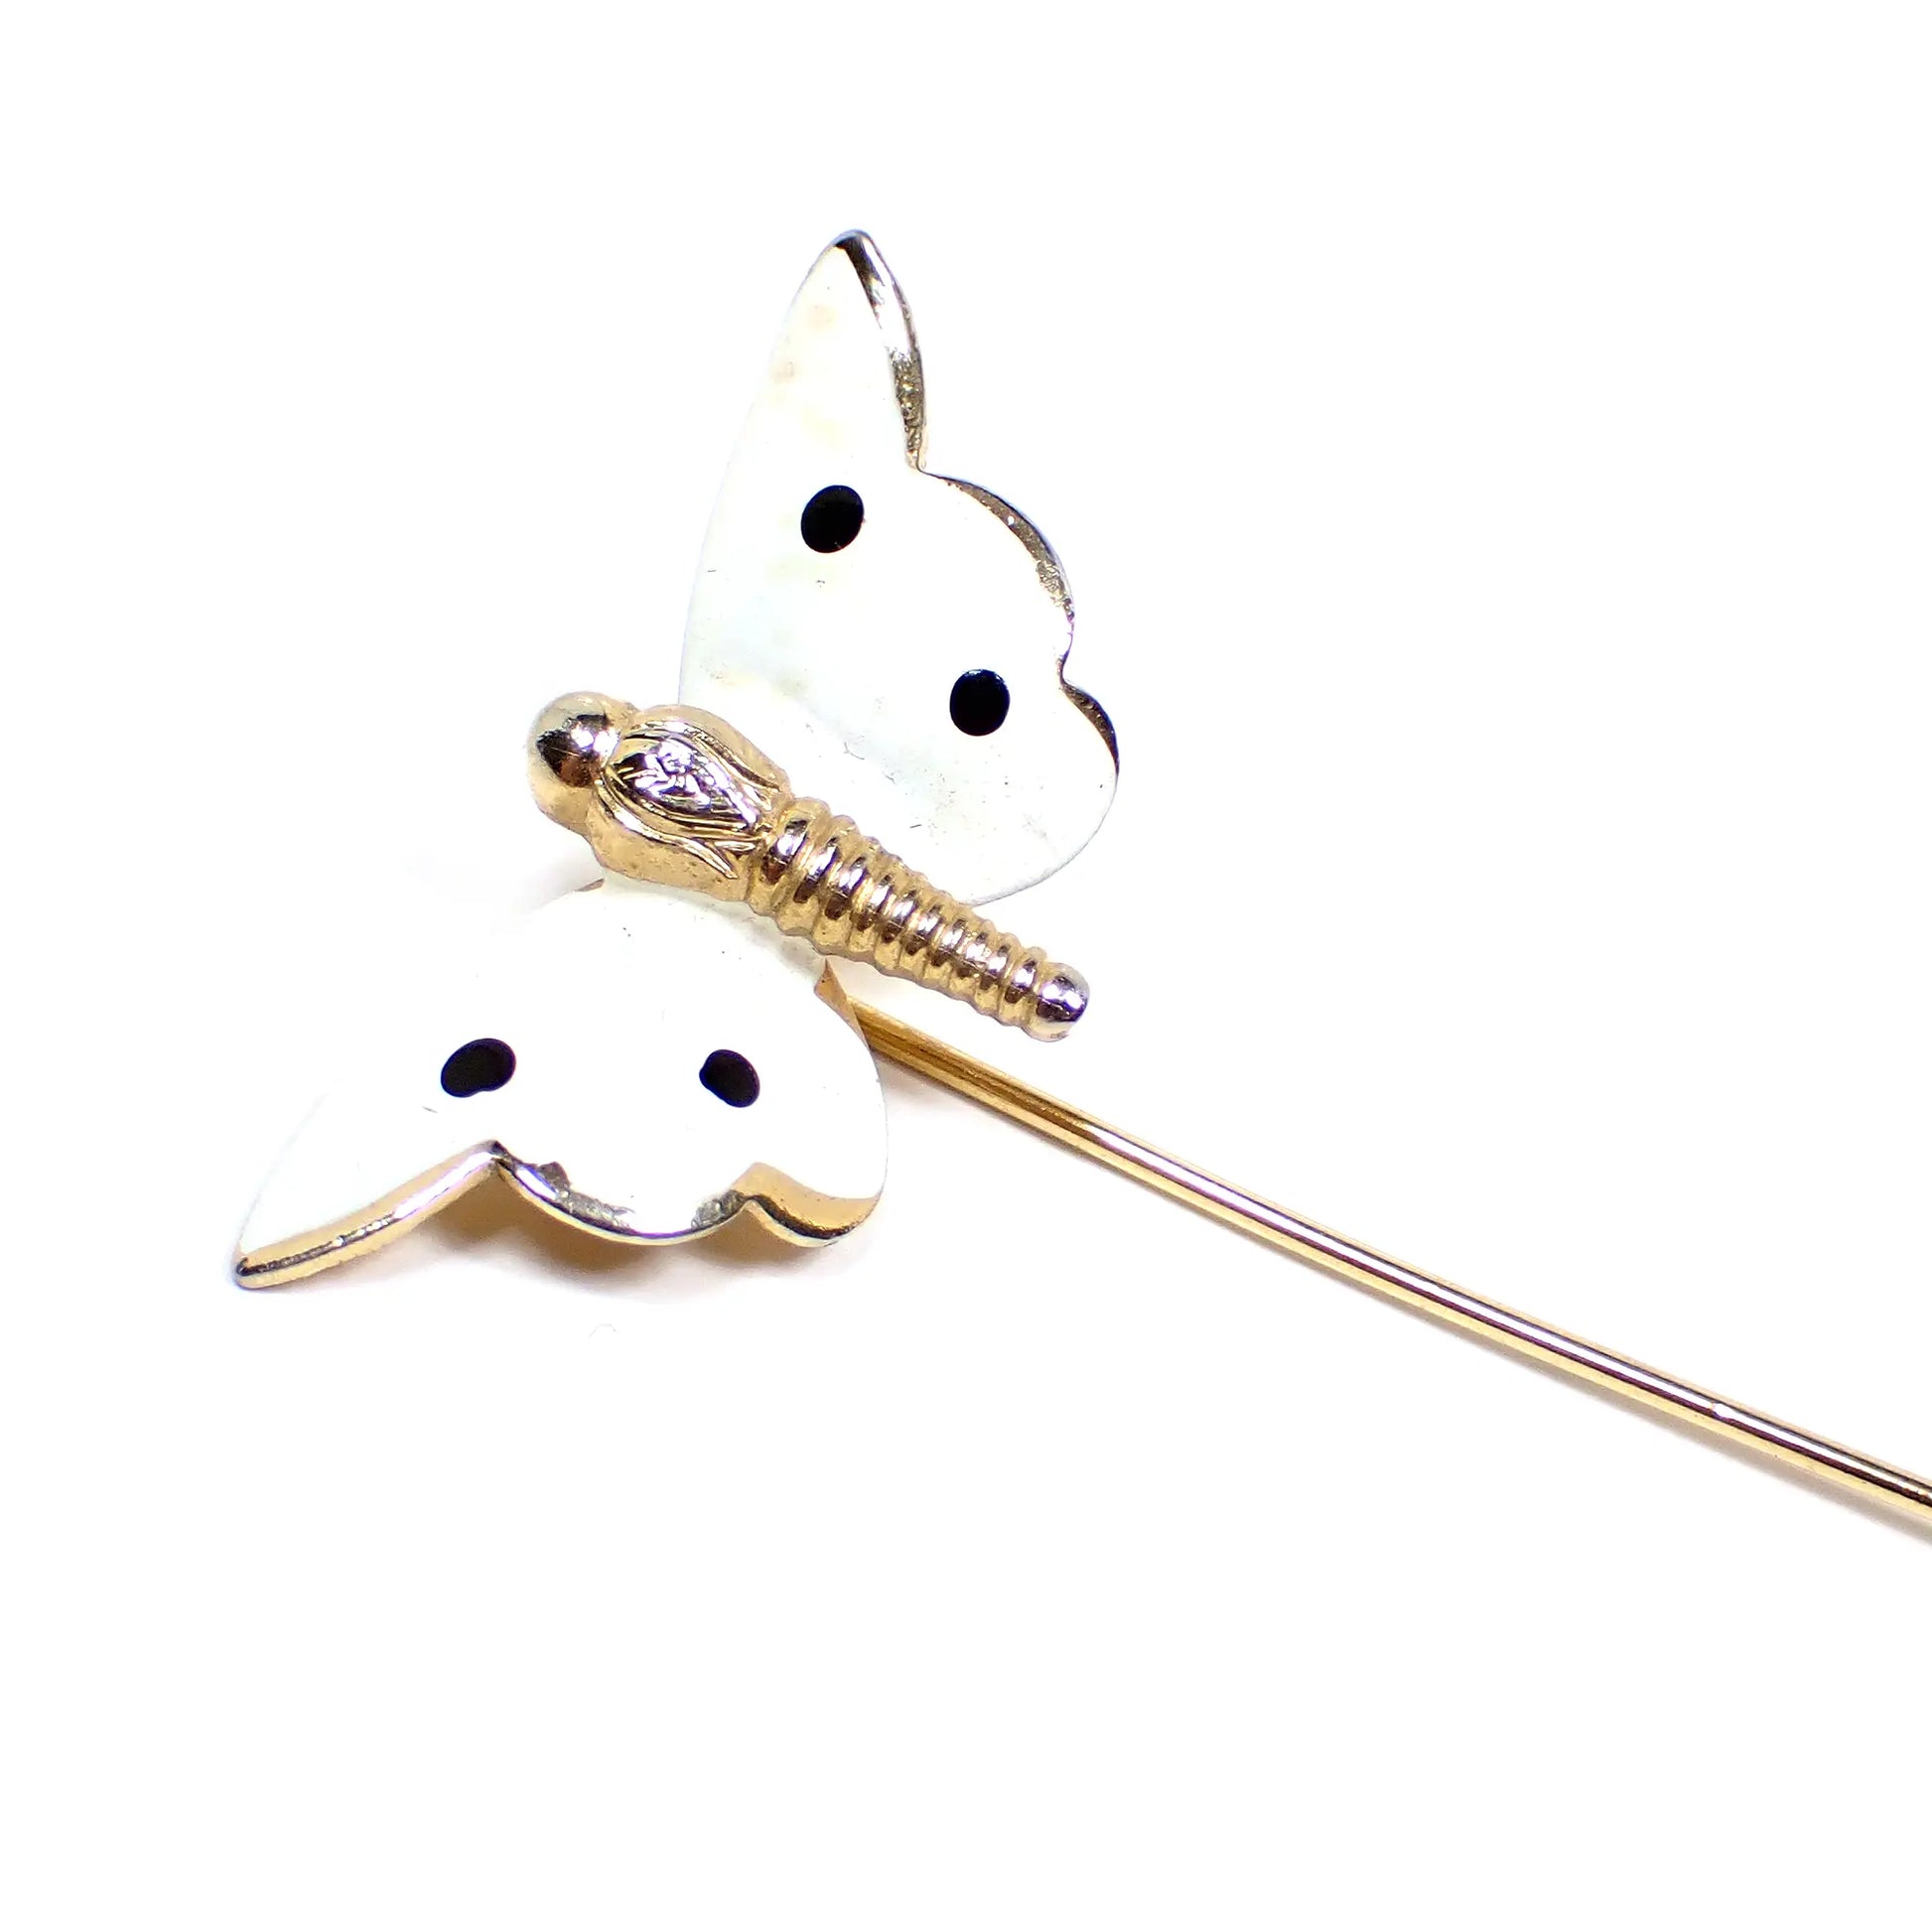 Enlarged view of the Mid Century vintage butterfly stick pin. The metal is gold tone in color. The wings of the butterfly are white enameled with 4 black enameled spots.